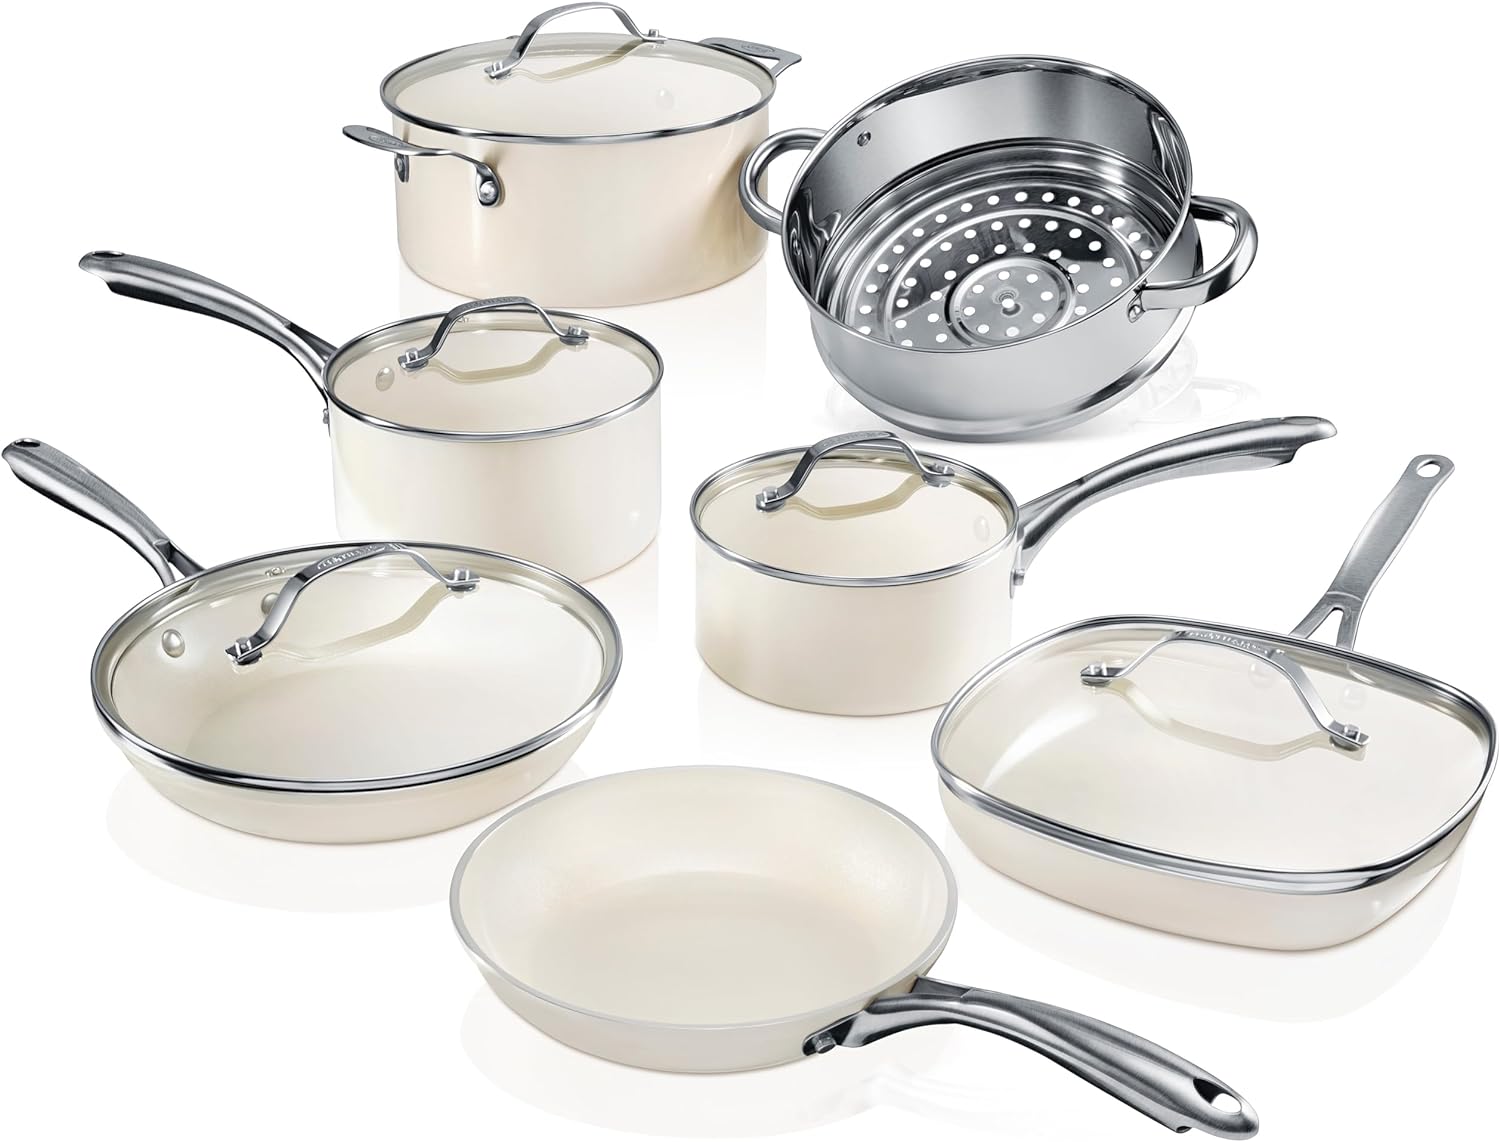 Gotham Steel 12 Pc Cookware Set Review